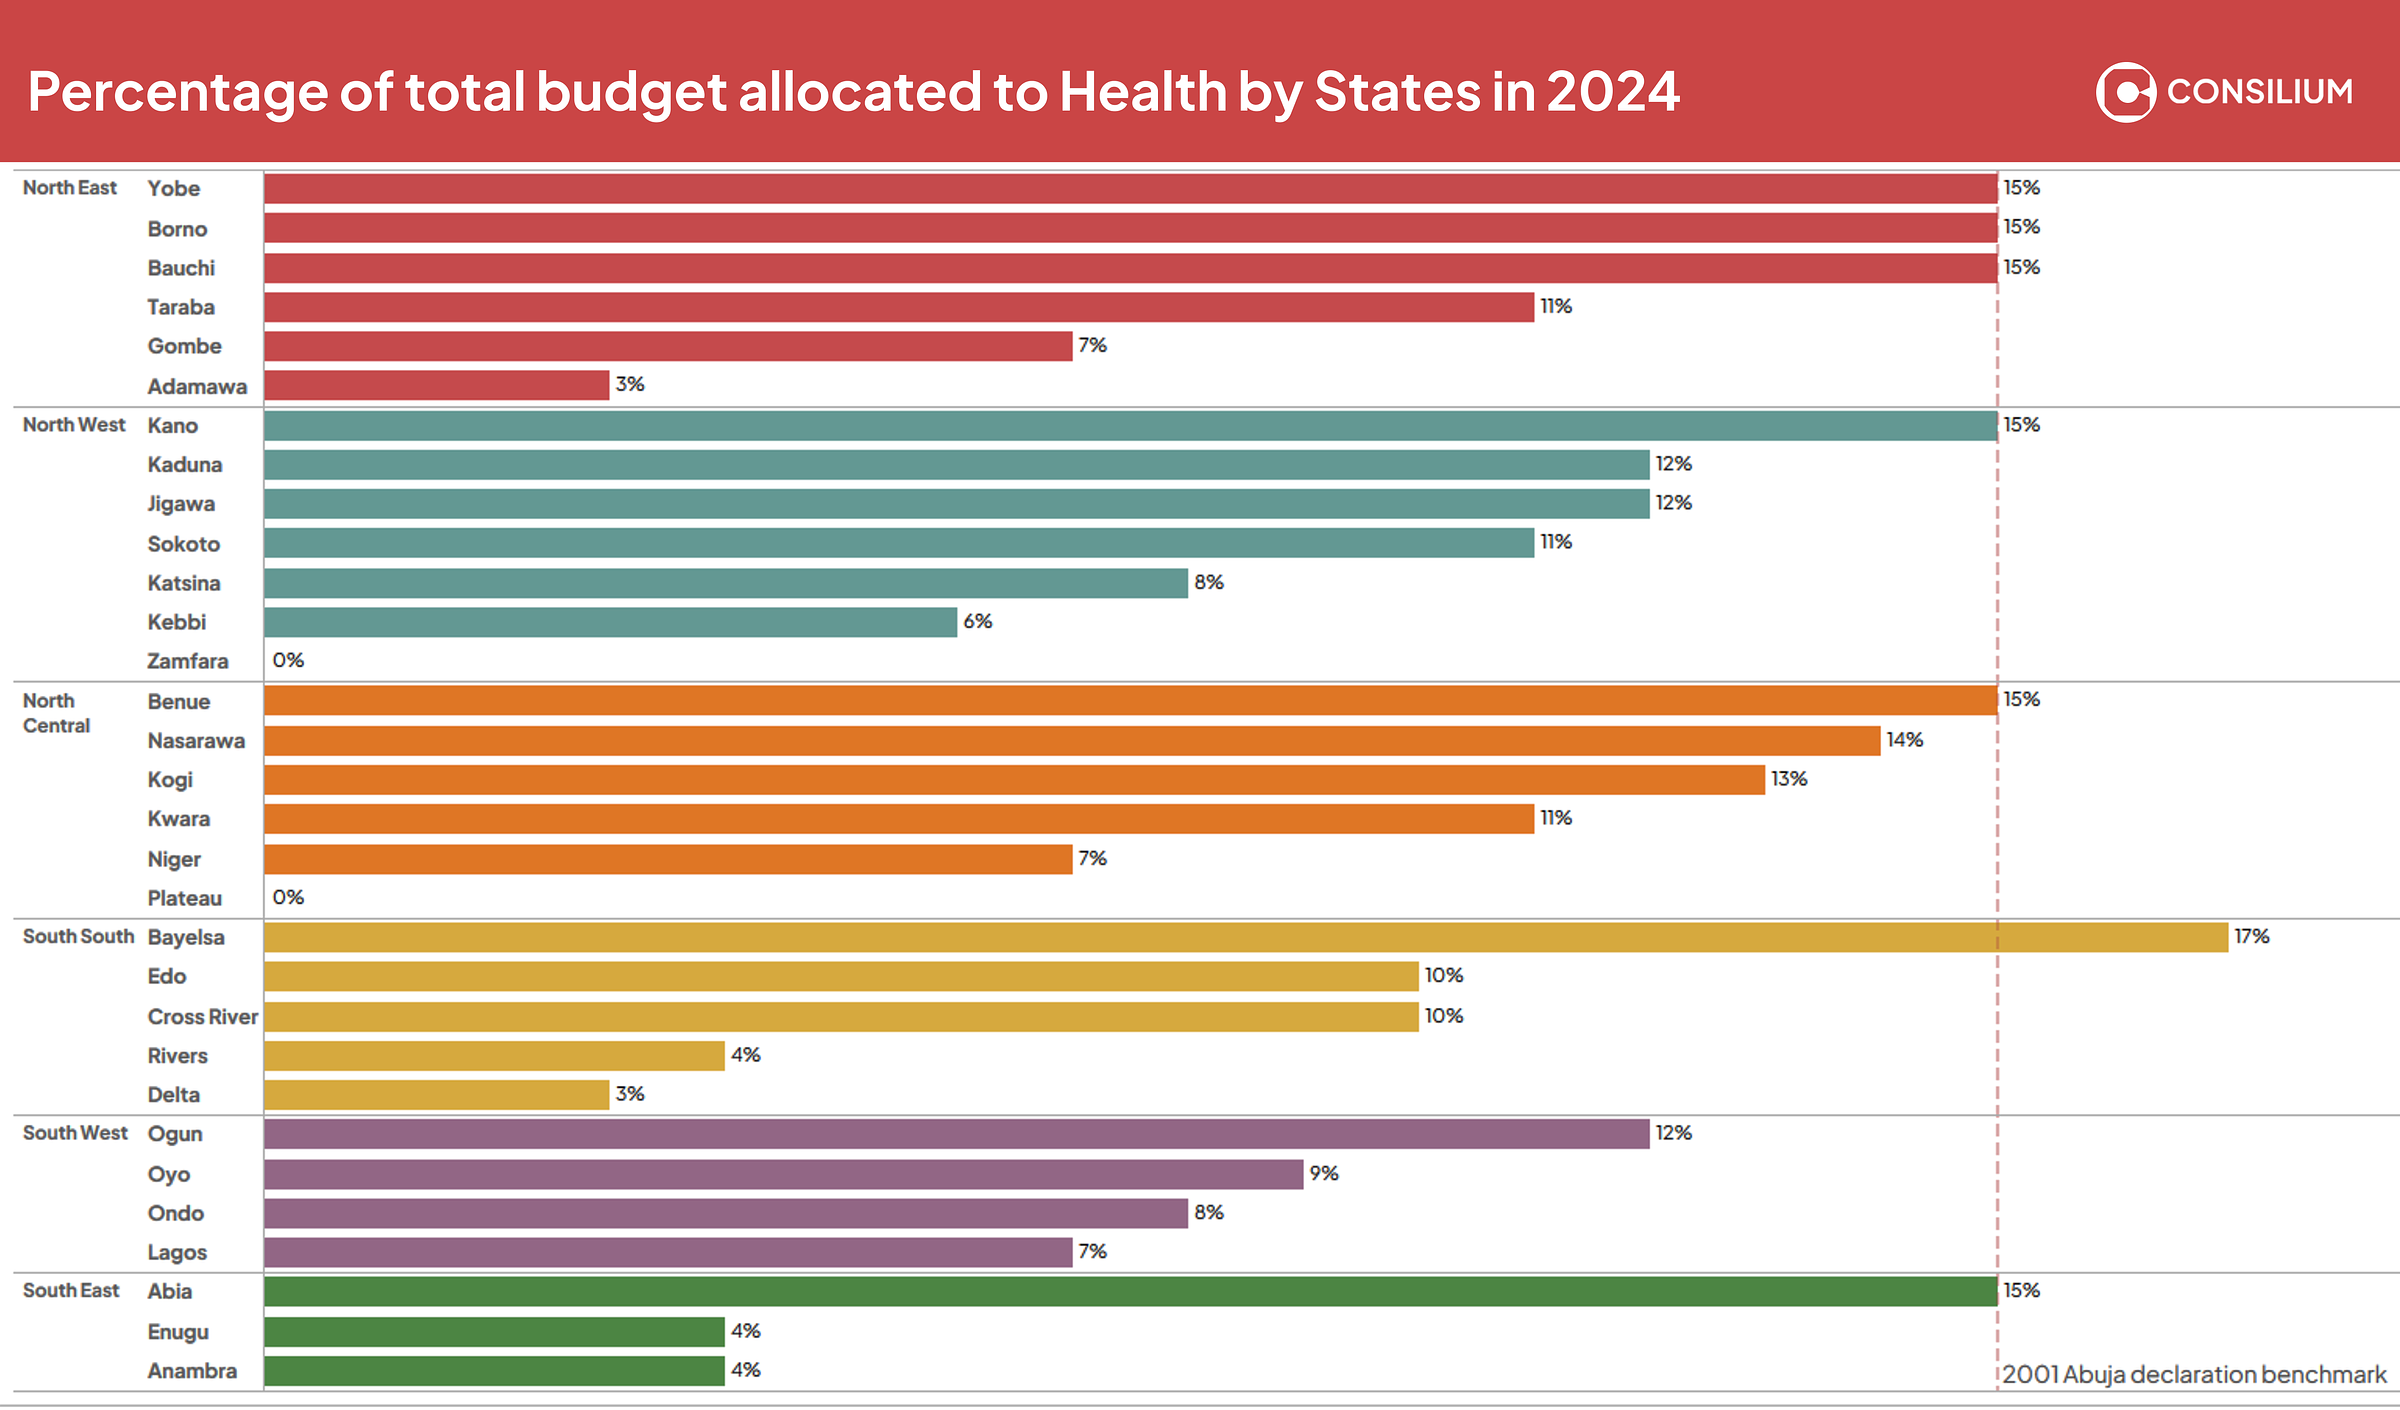 Percentage of budget allocated to Health by Nigerian States in 2024 compared to the 2001 Abuja declaration